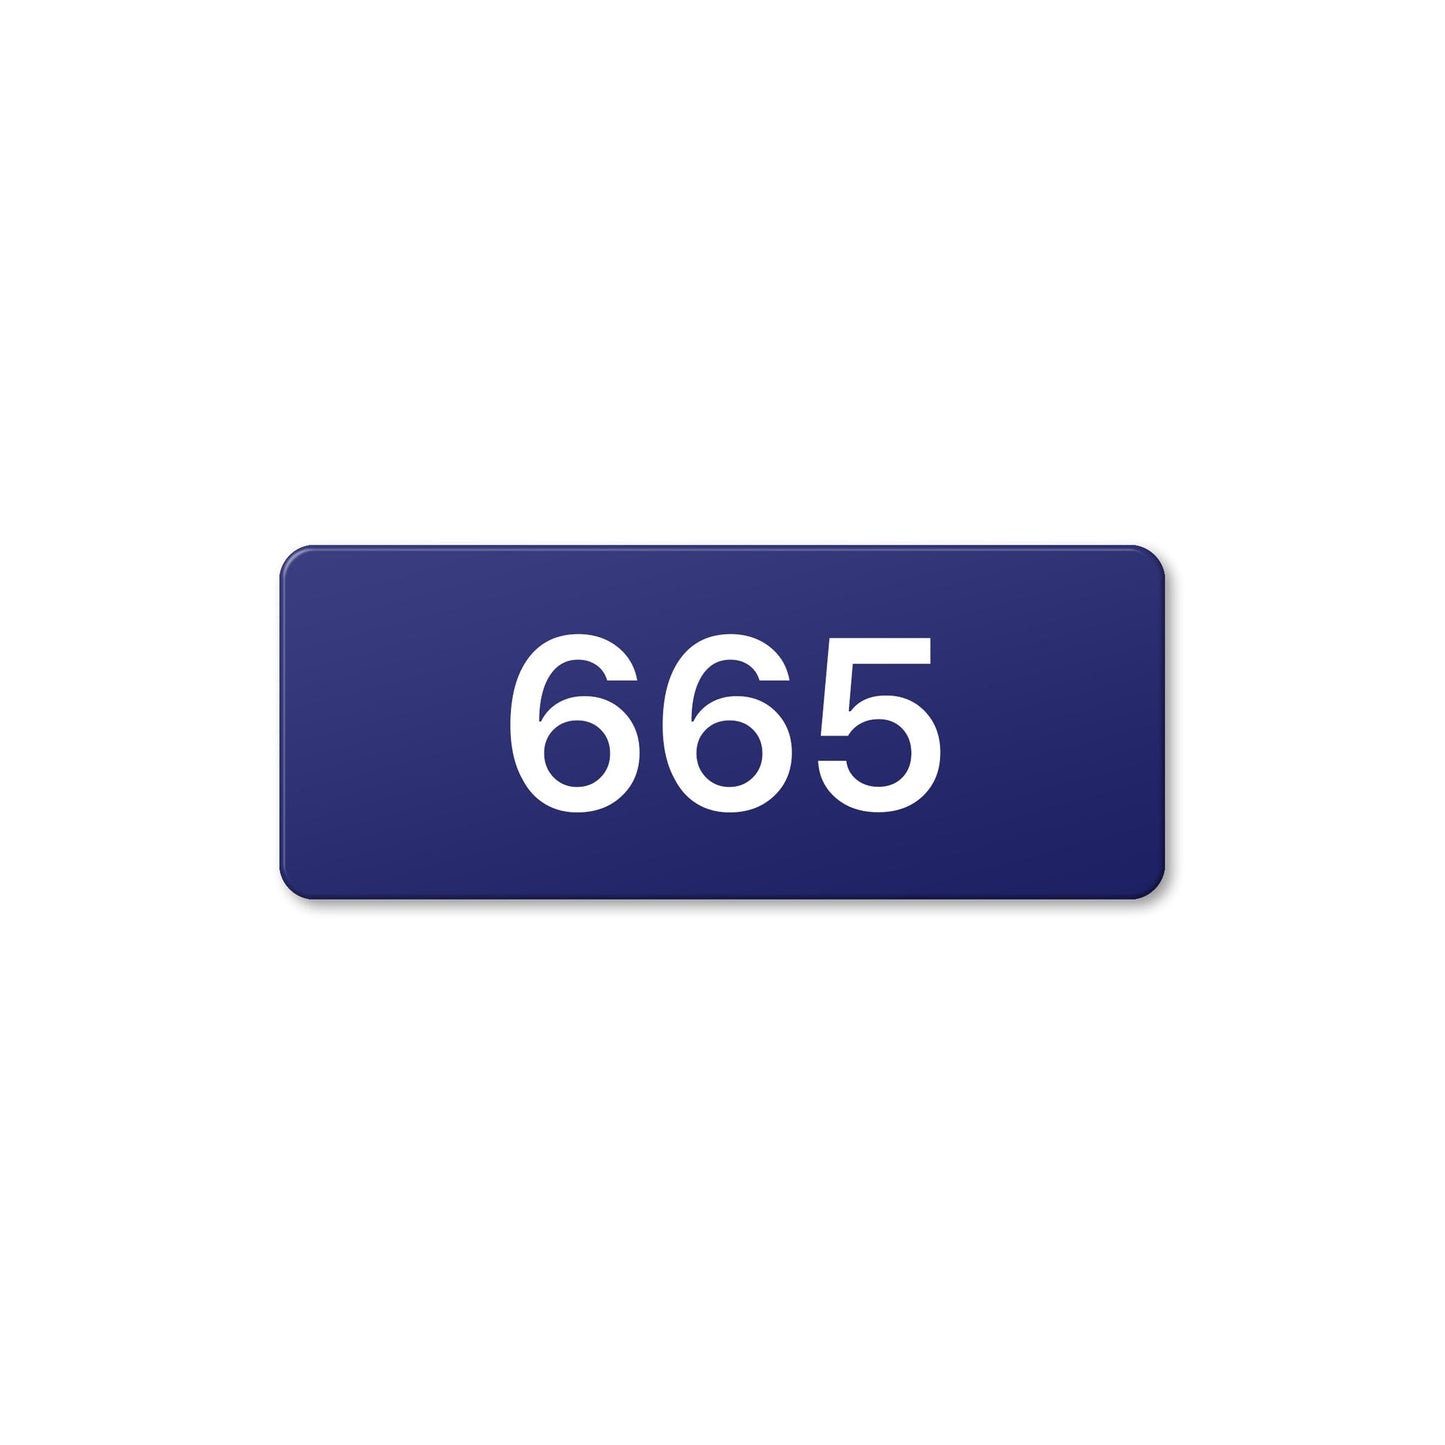 Numeral 665